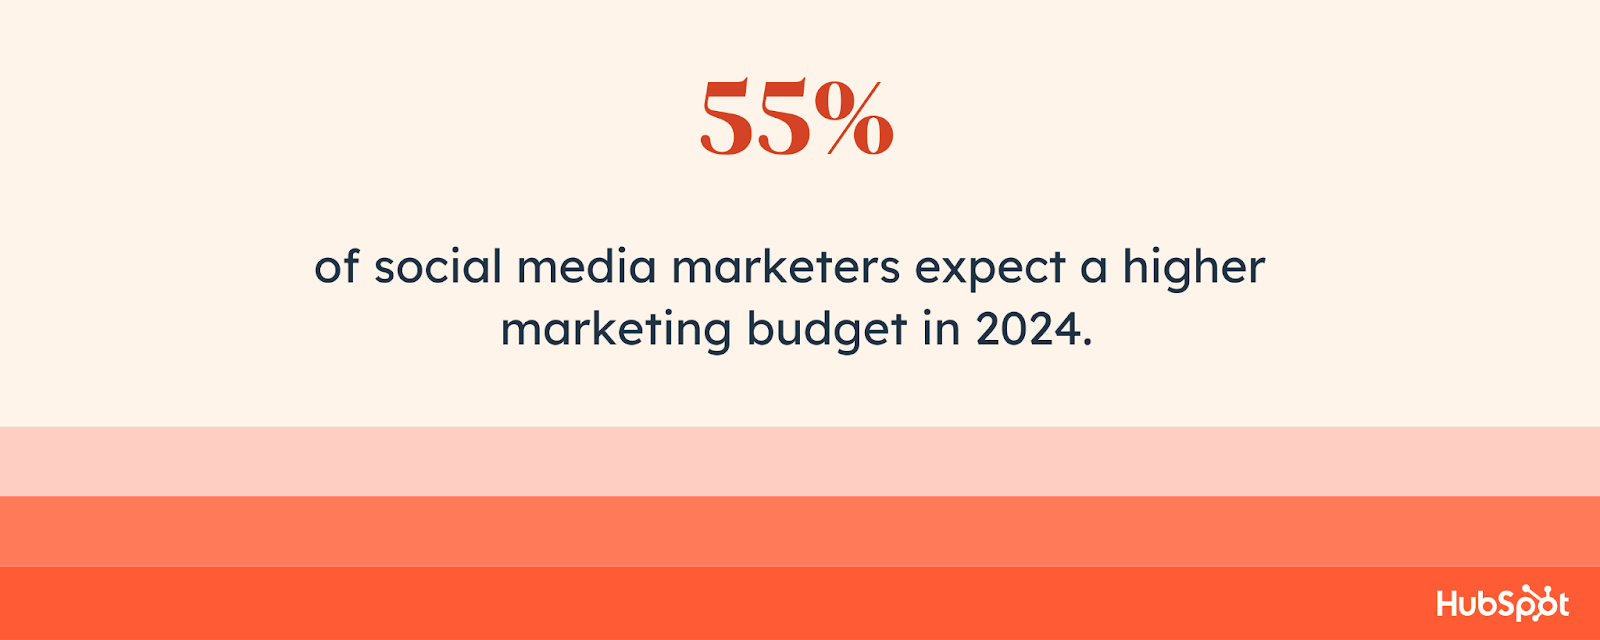 55% of social media marketers expect a higher marketing budget in 2024